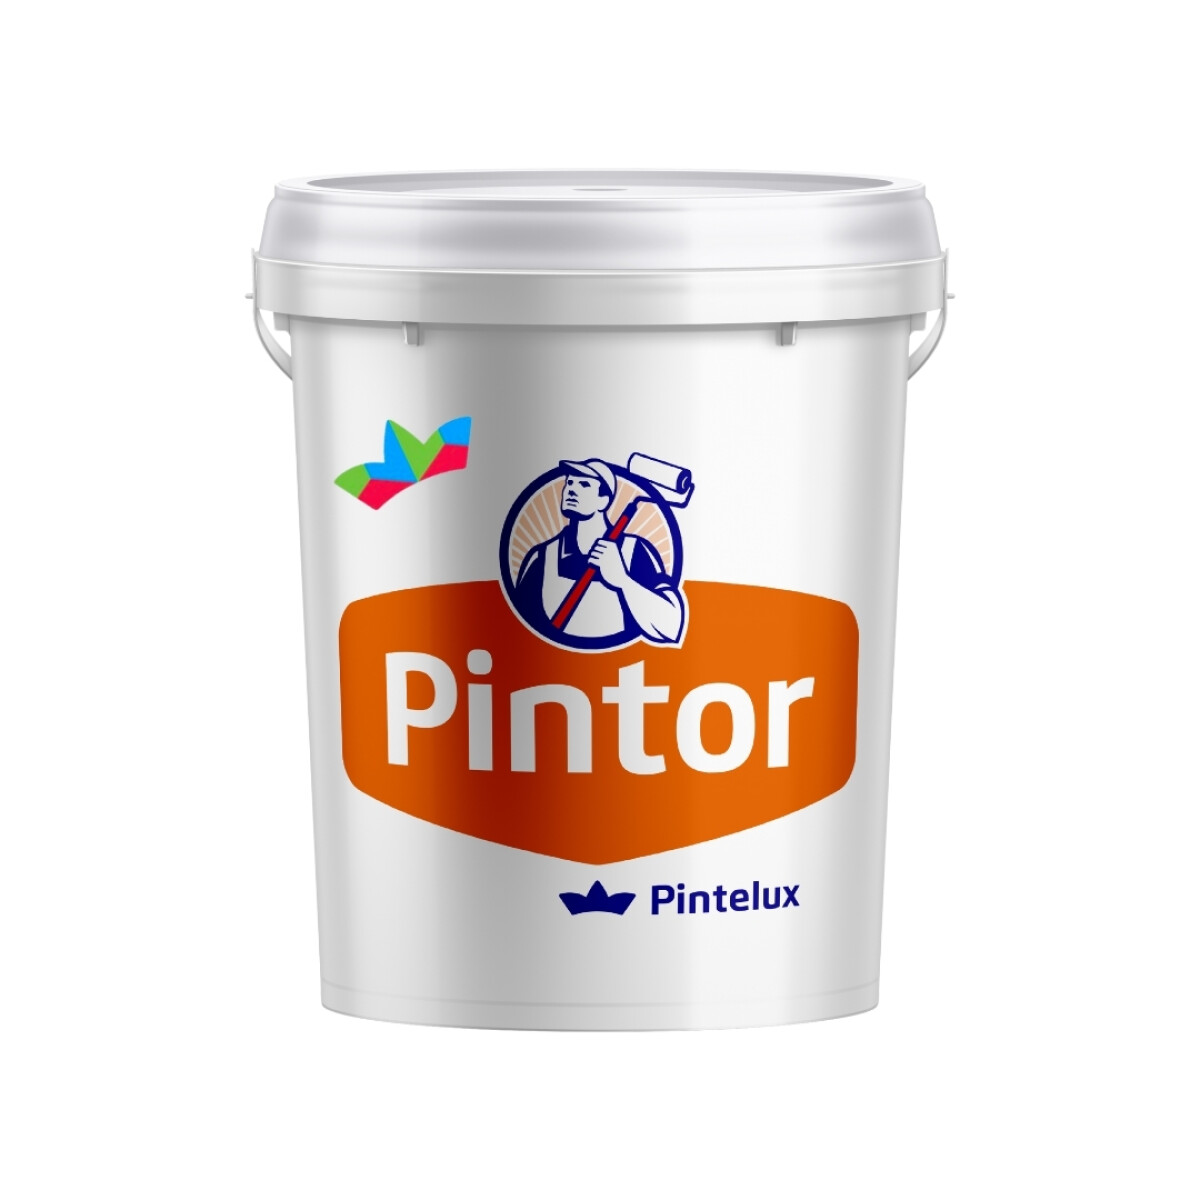 PINTOR MULTIPROPOSITO TEXAS - 3.6LTS 